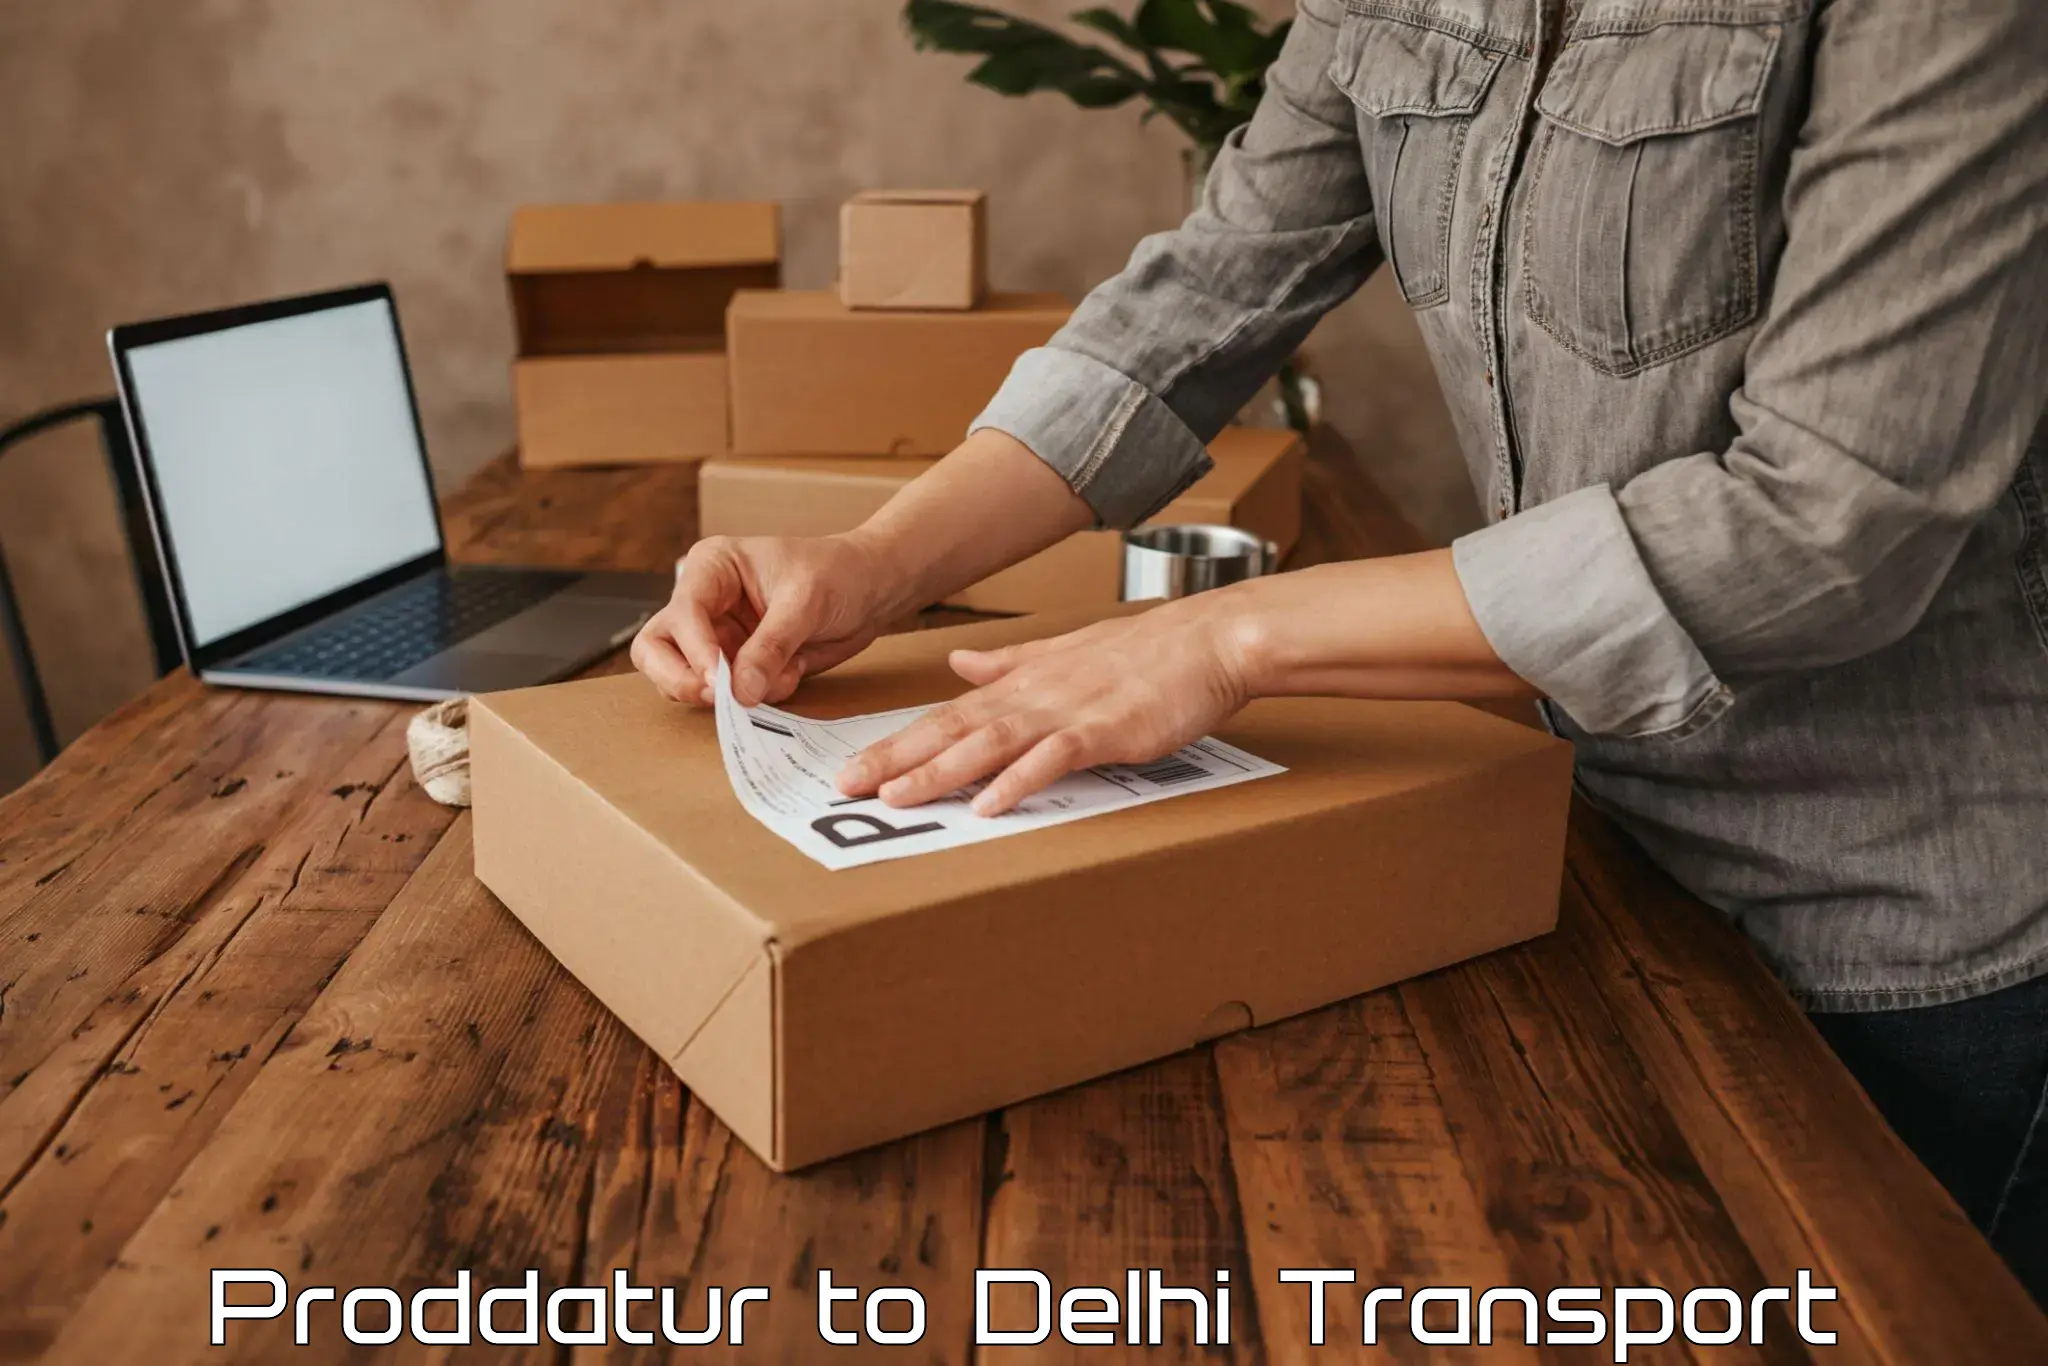 Shipping services Proddatur to NCR